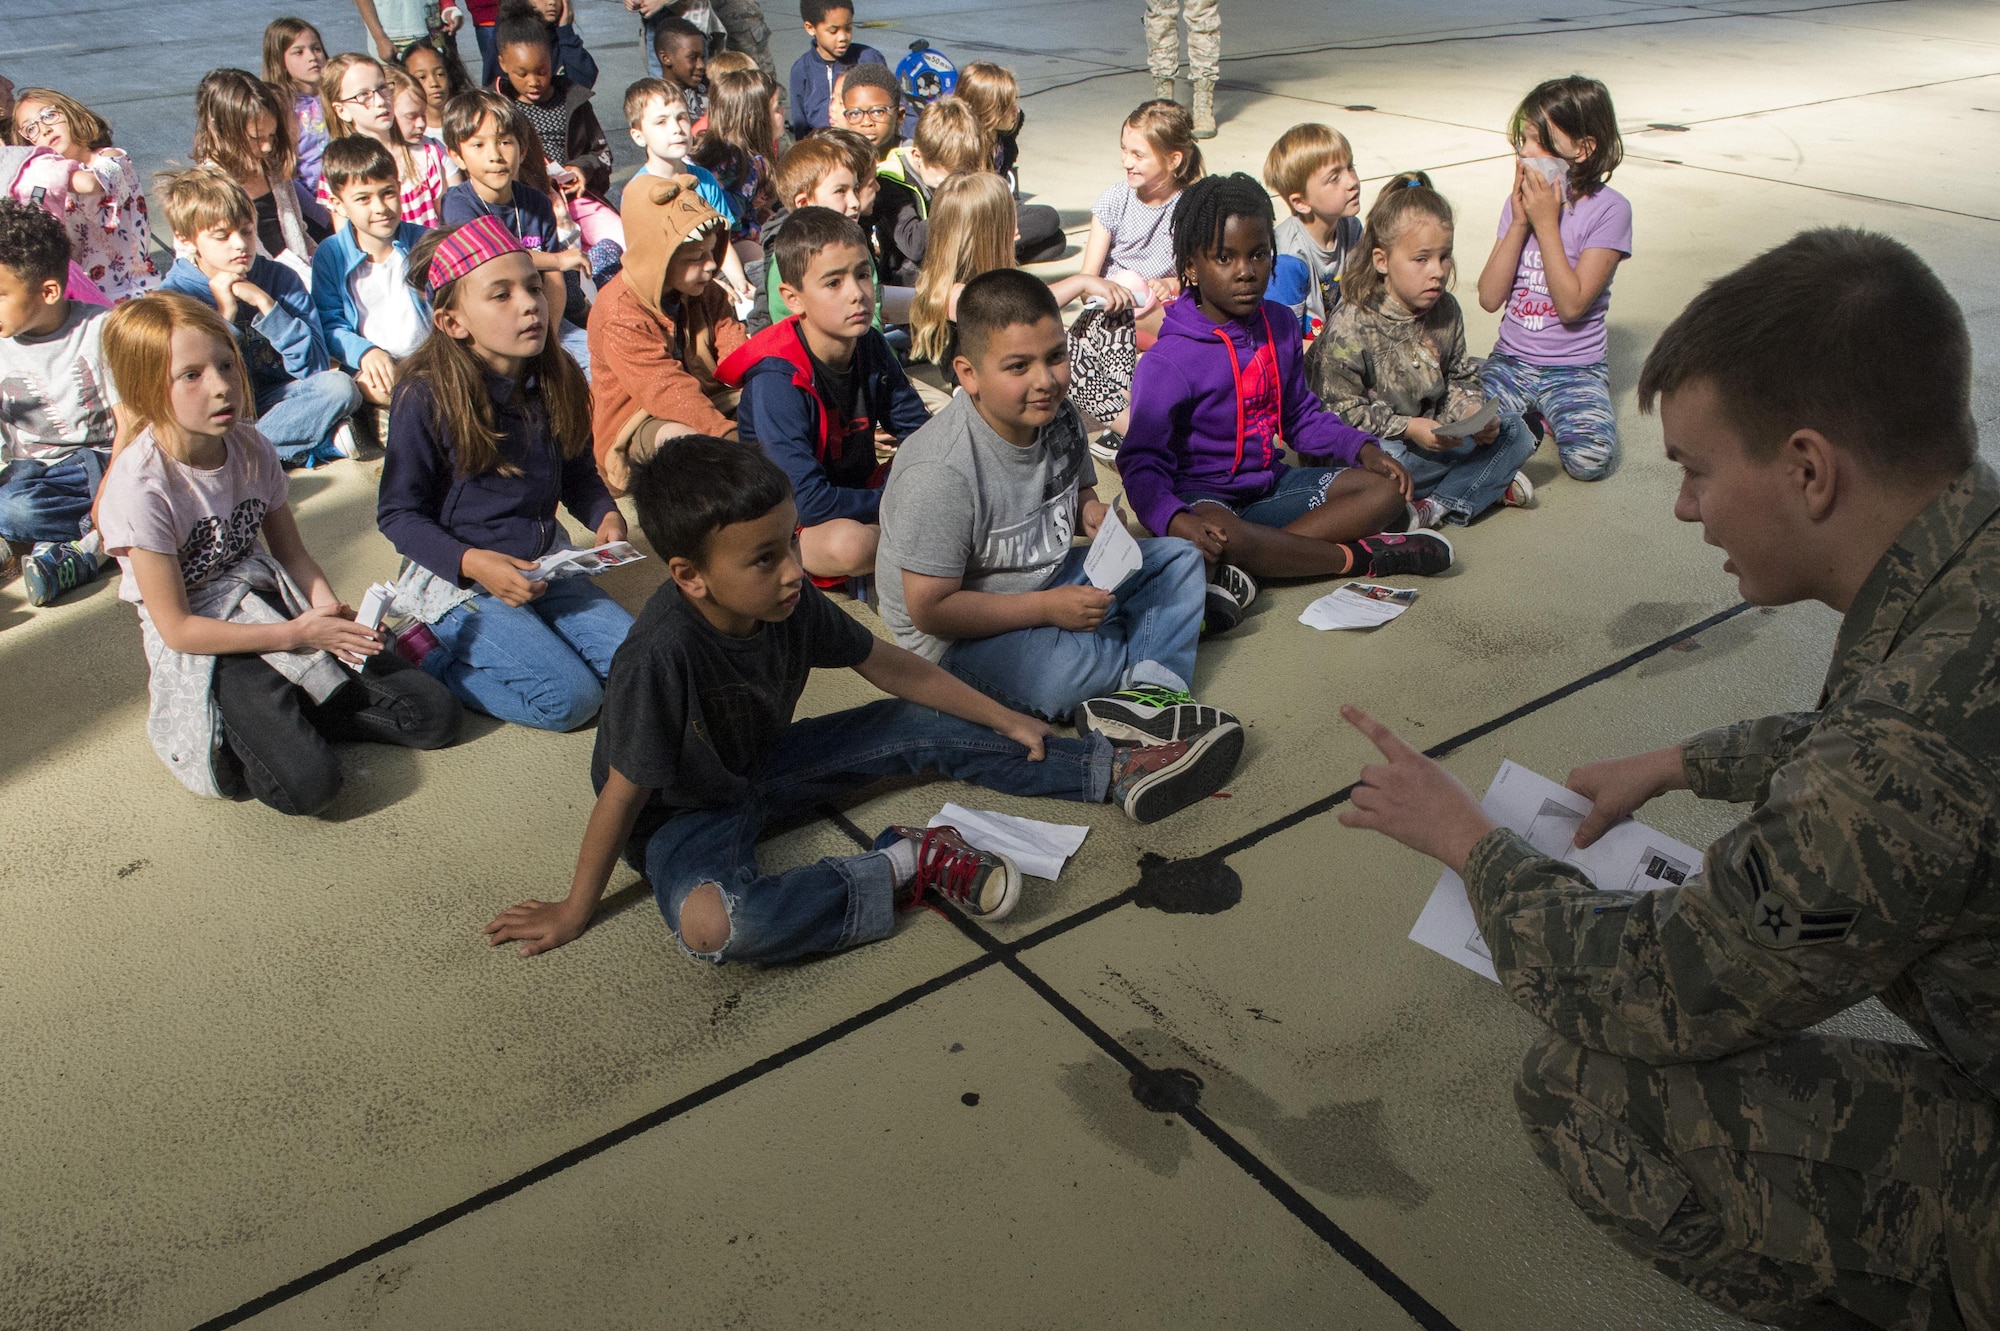 U.S. Air Force Airman 1st Class Kyle Hamby, 52nd Operations Support Squadron intelligence analyst, speaks to Spangdahlem Elementary School students during Children’s Deployment Days at Spangdahlem Air Base, Germany, May 22, 2017. The event was a three-day simulated deployment line for students in kindergarten through fifth grade and consisted of a mock pre-deployment brief, a look at individual protective equipment, mock immunizations, static vehicle displays and a tour of a C-17 Globemaster III aircraft. (U.S. Air Force photo by Airman 1st Class Preston Cherry)